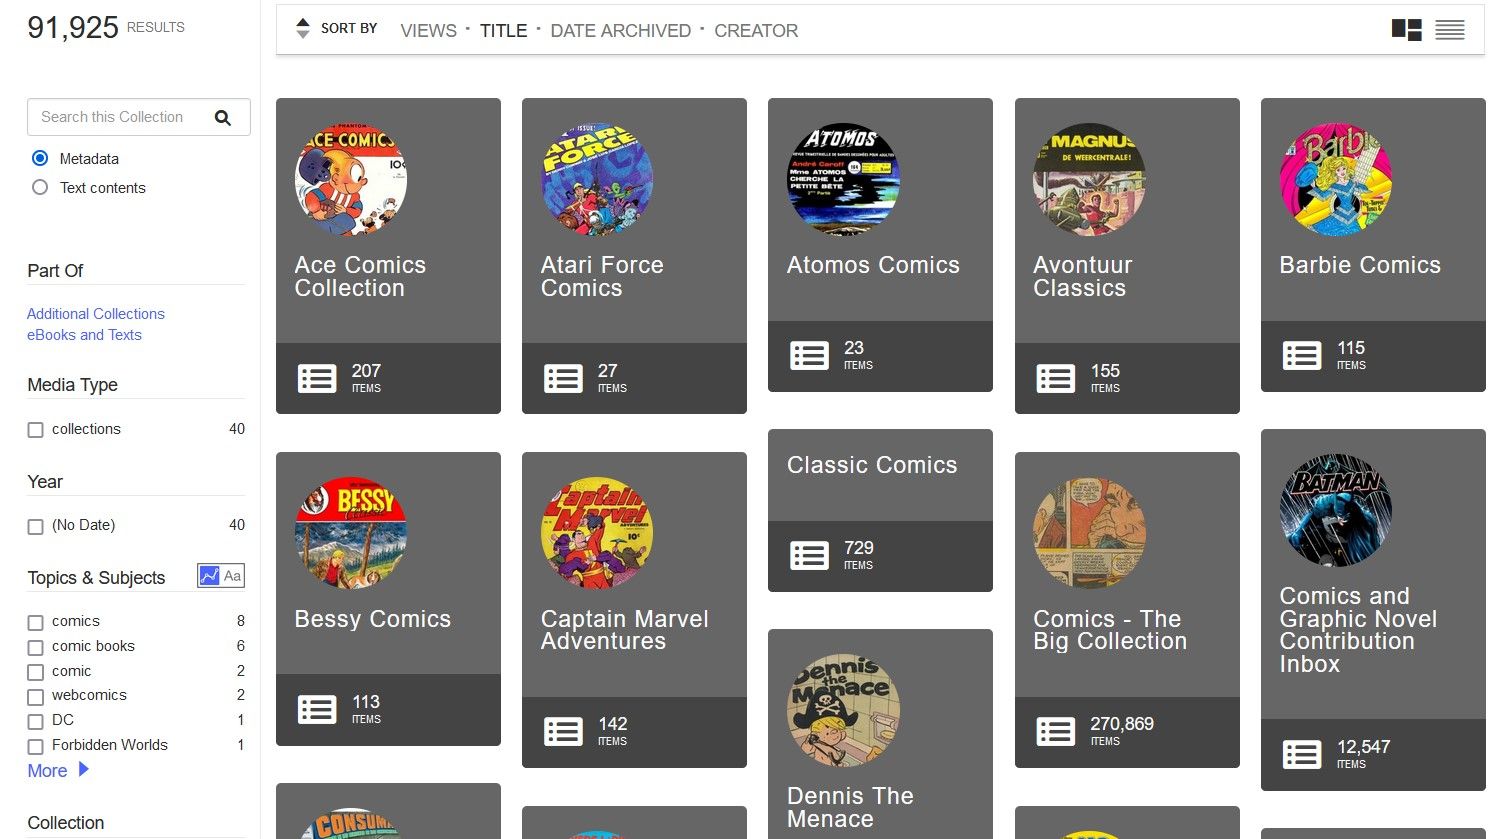 Internet Archive Collection of Comics and Graphic Novels